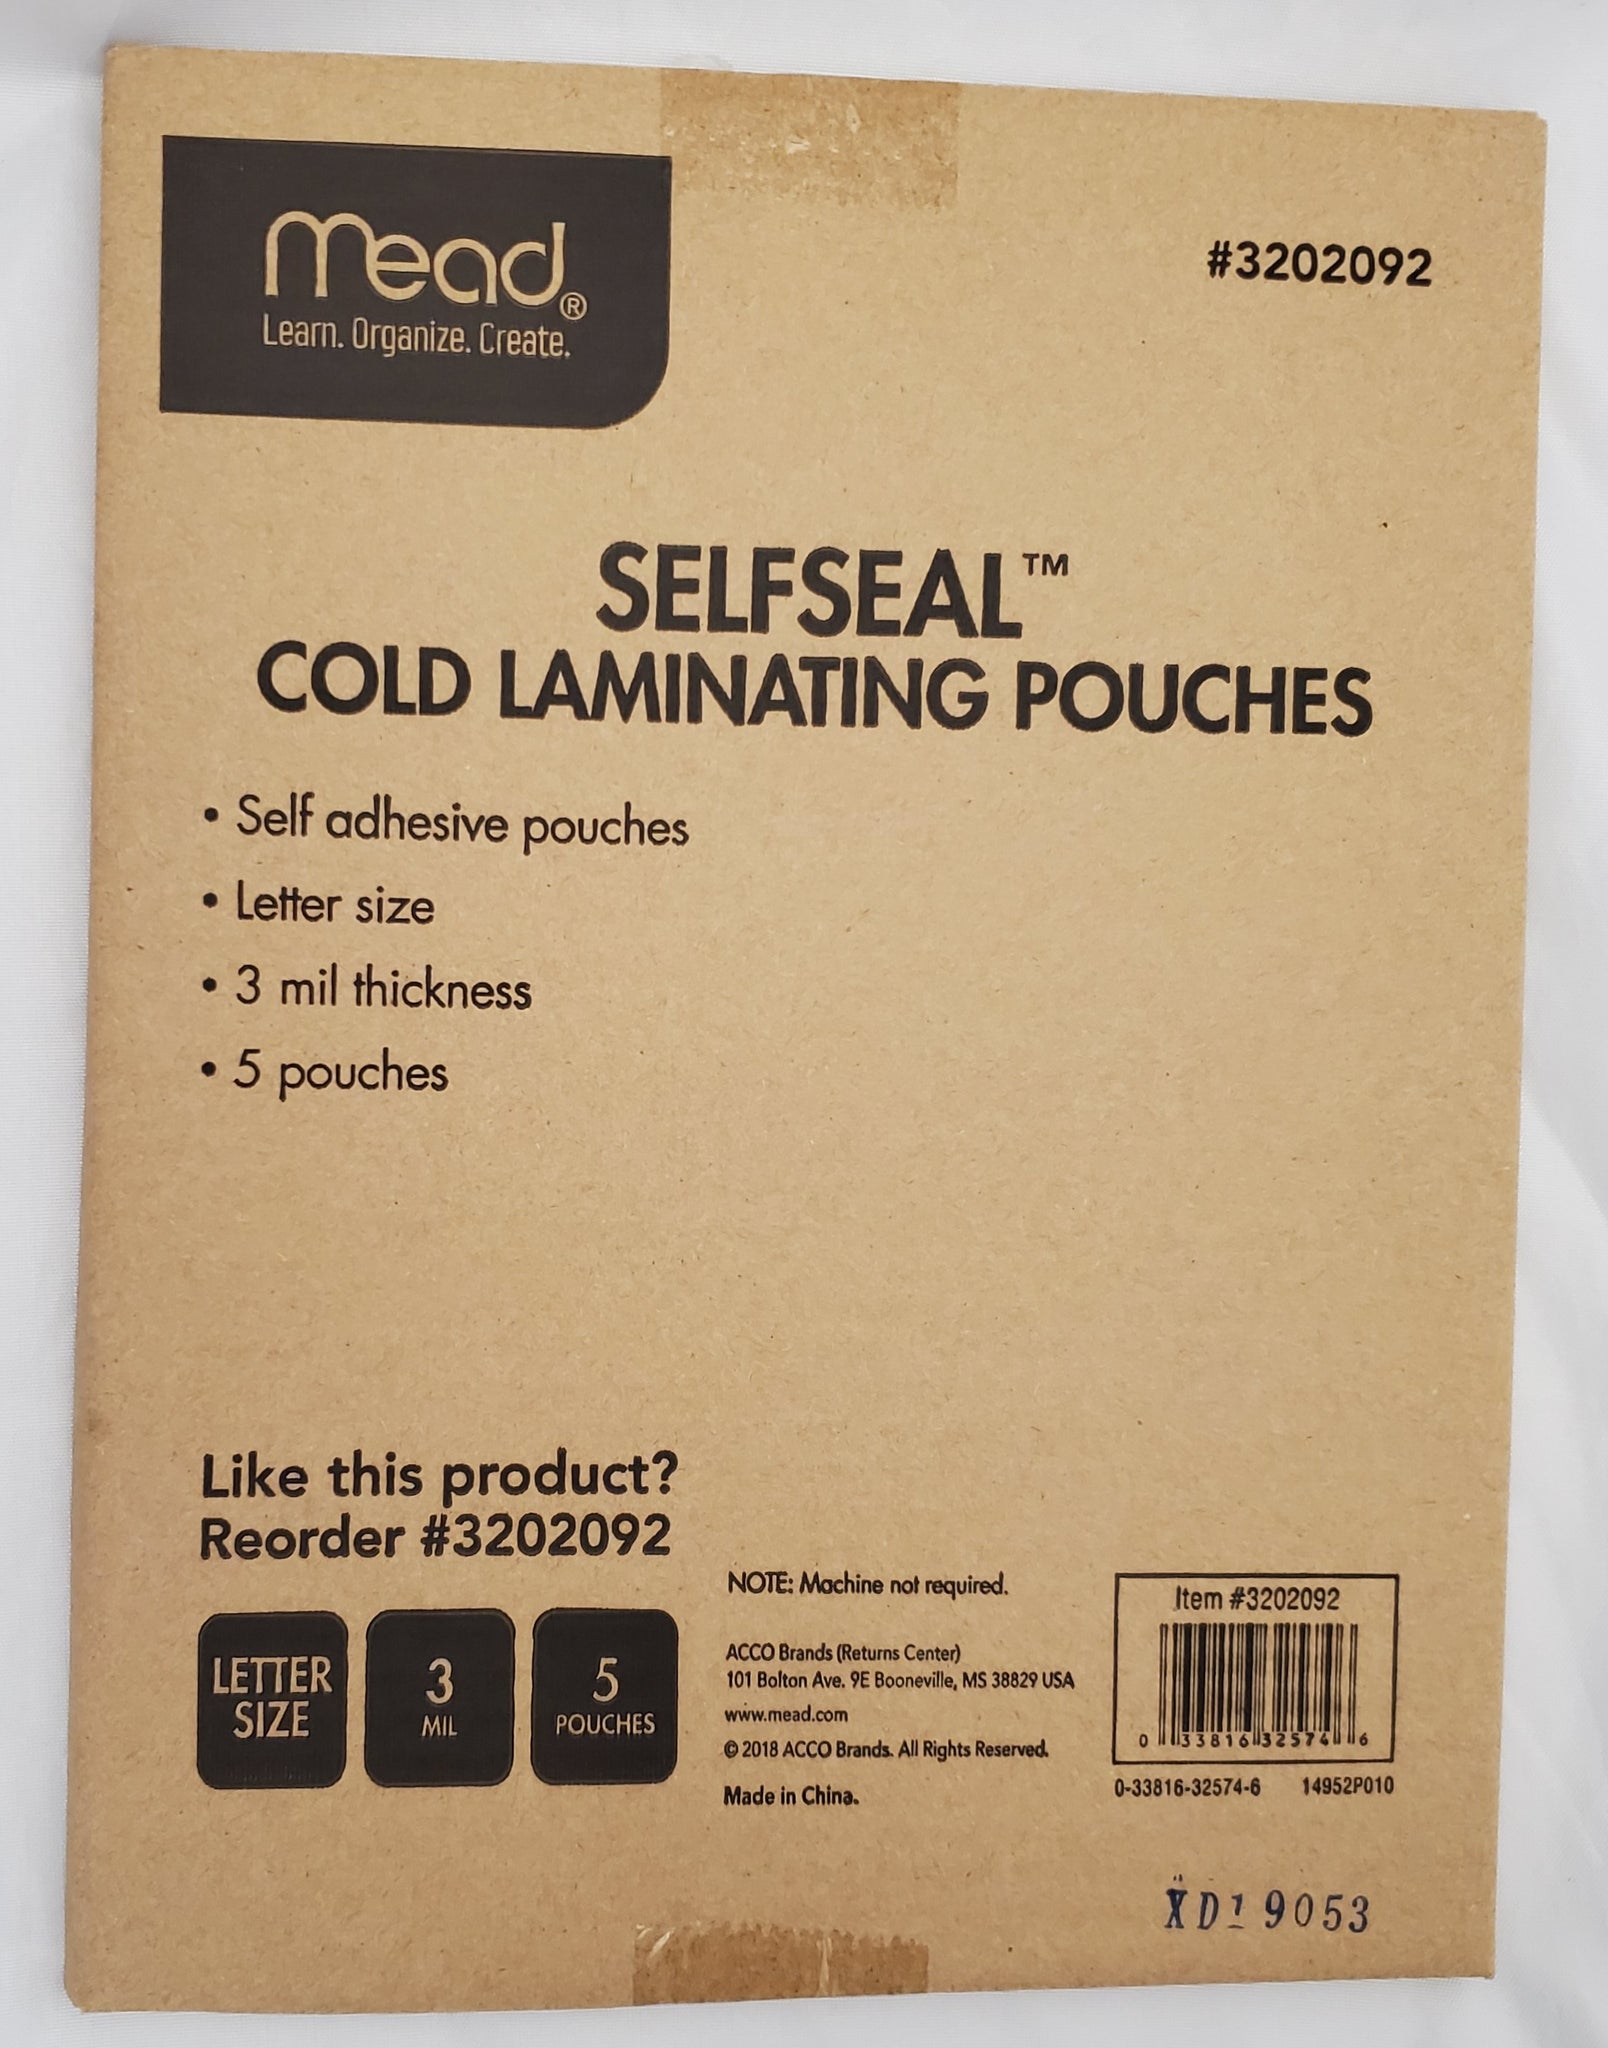 Mead Self-Seal Cold Laminating Pouches, 5 Pack 8.5 x 11 3 Mil (3202092)